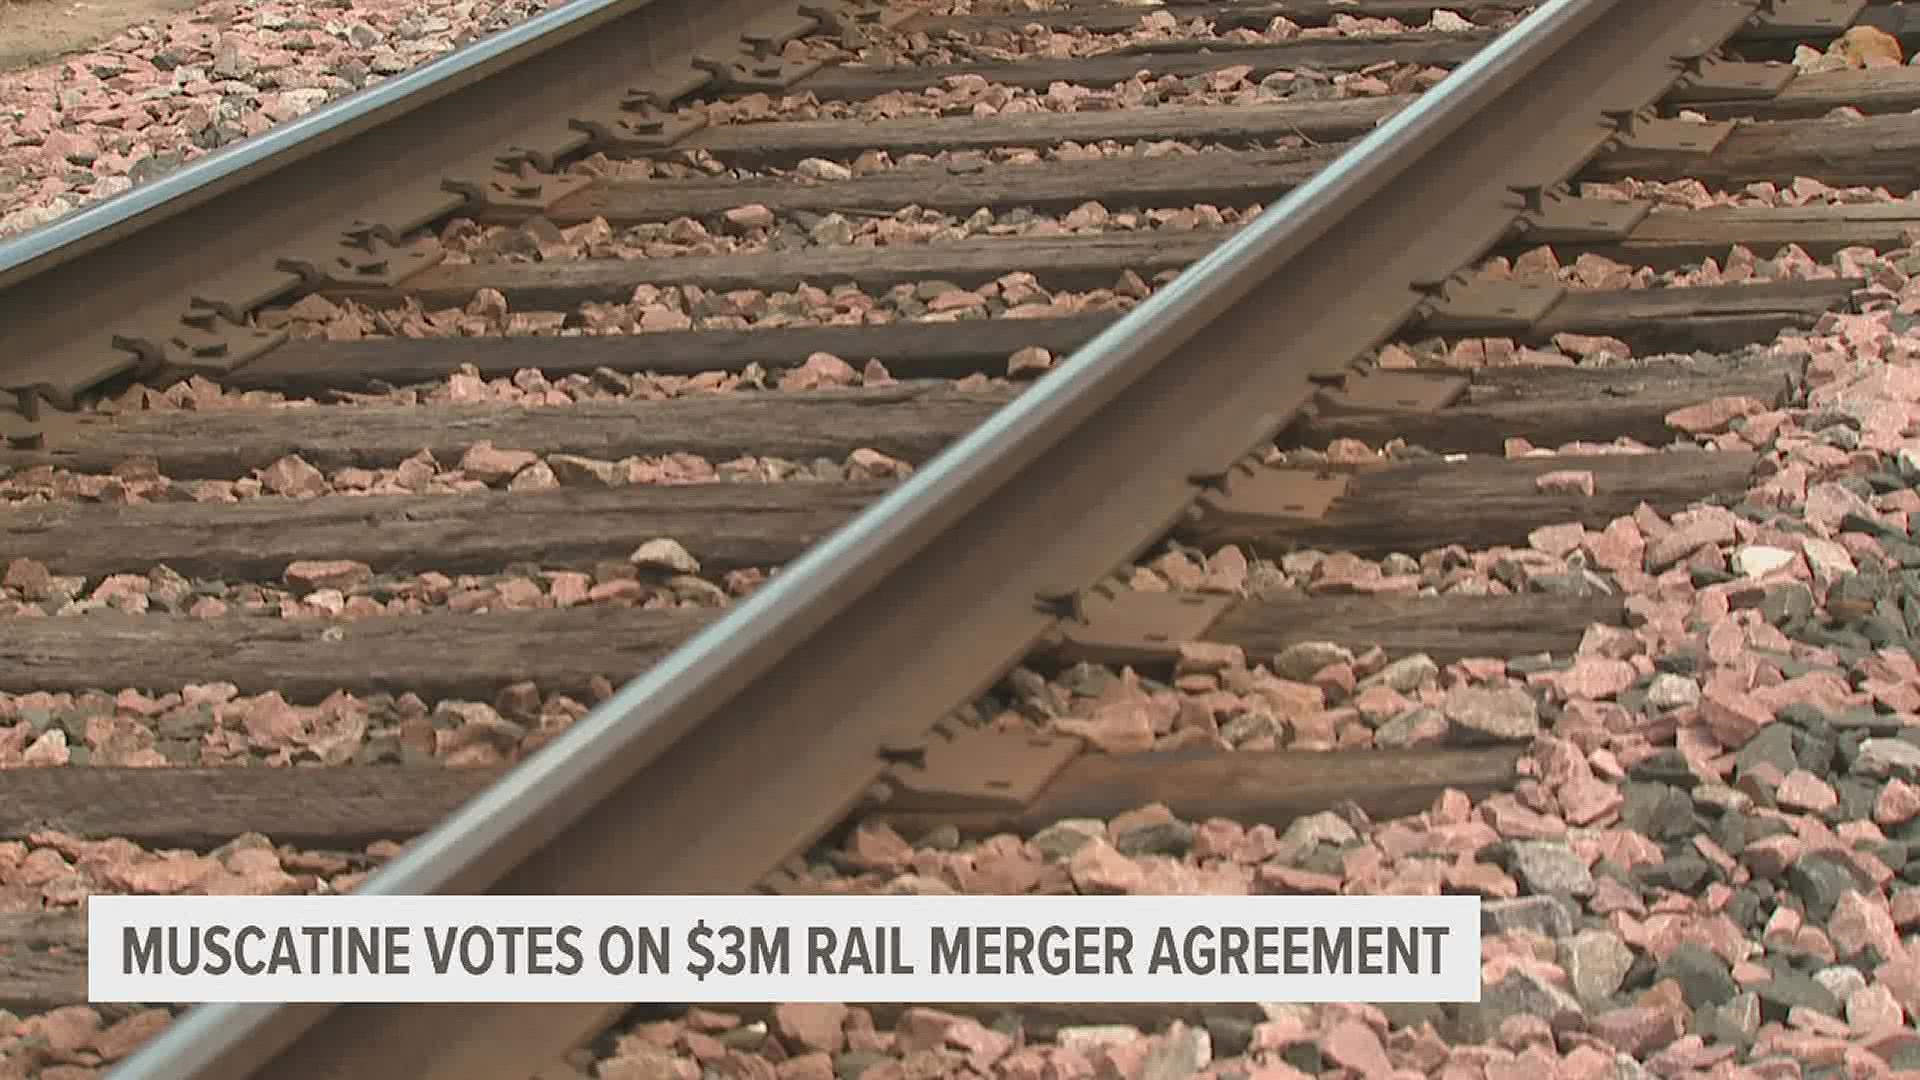 Muscatine will vote on a proposal from the Canadian Pacific Railway and Kansas City Southern Railway Company that will bring an overpass to the city.